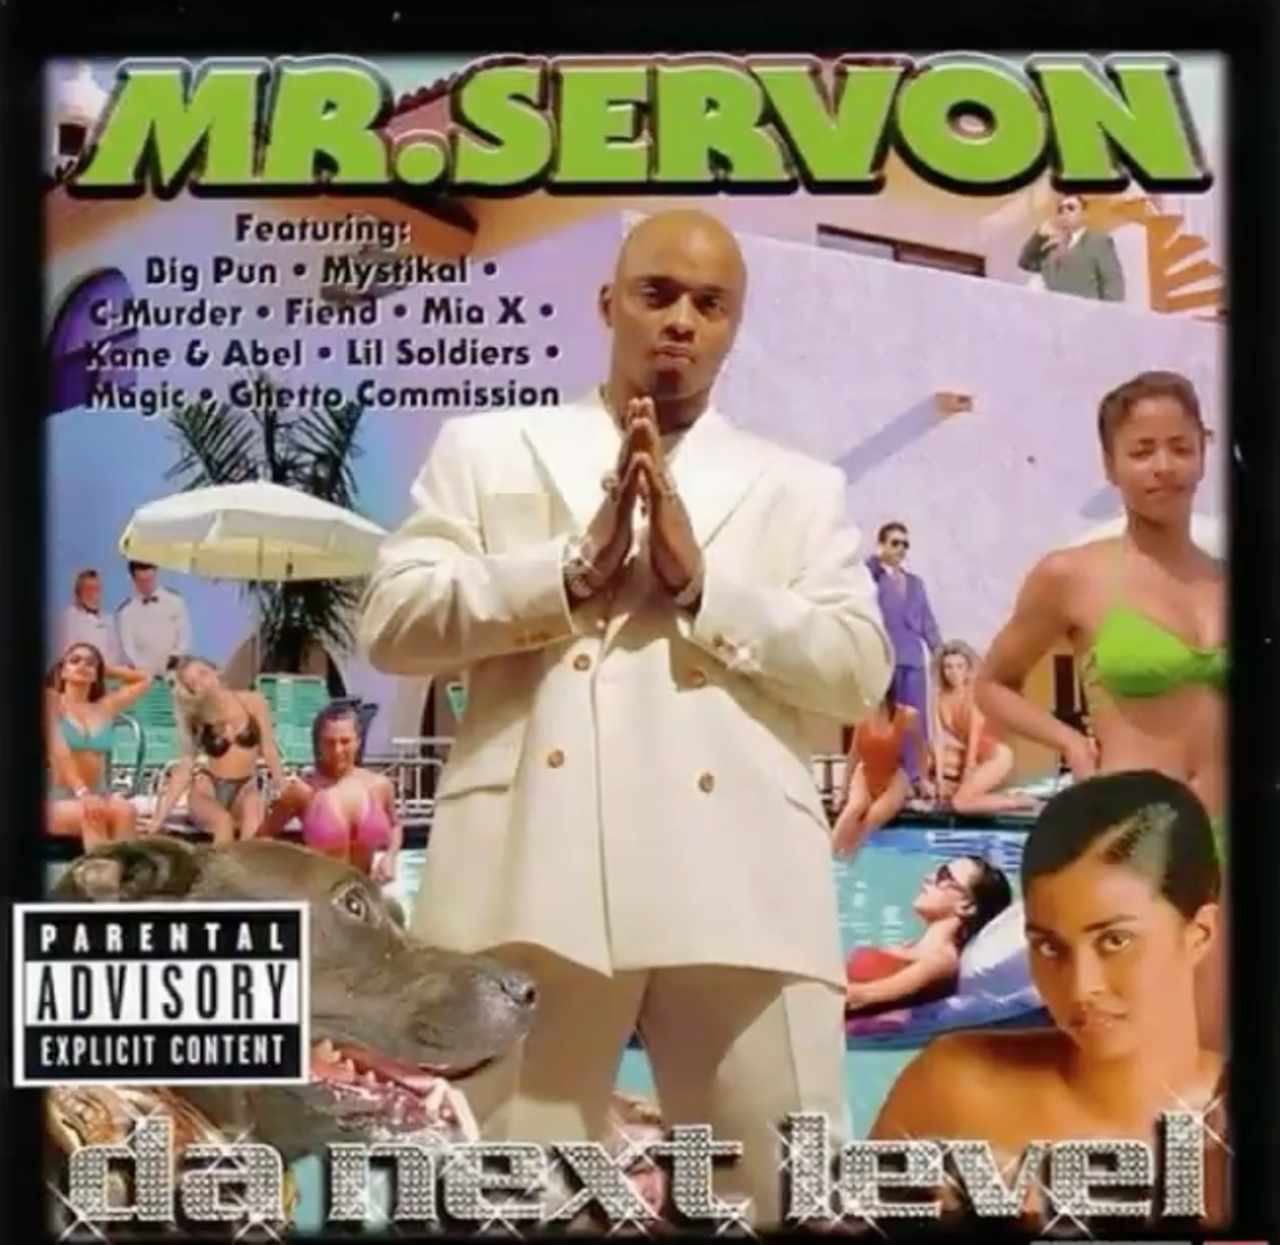 Mr. Serv-on – “Throw Ya City Up”
“It's ’97 I'm back to start some real shit
The scene's real enough to fuck with my click
I hear em screaming from Jackson, Mississippi to Lebanon City
Banging in Dallas, San Antonio, Orange Mount, Tennessee”
Photo via Instagram / doubledown65